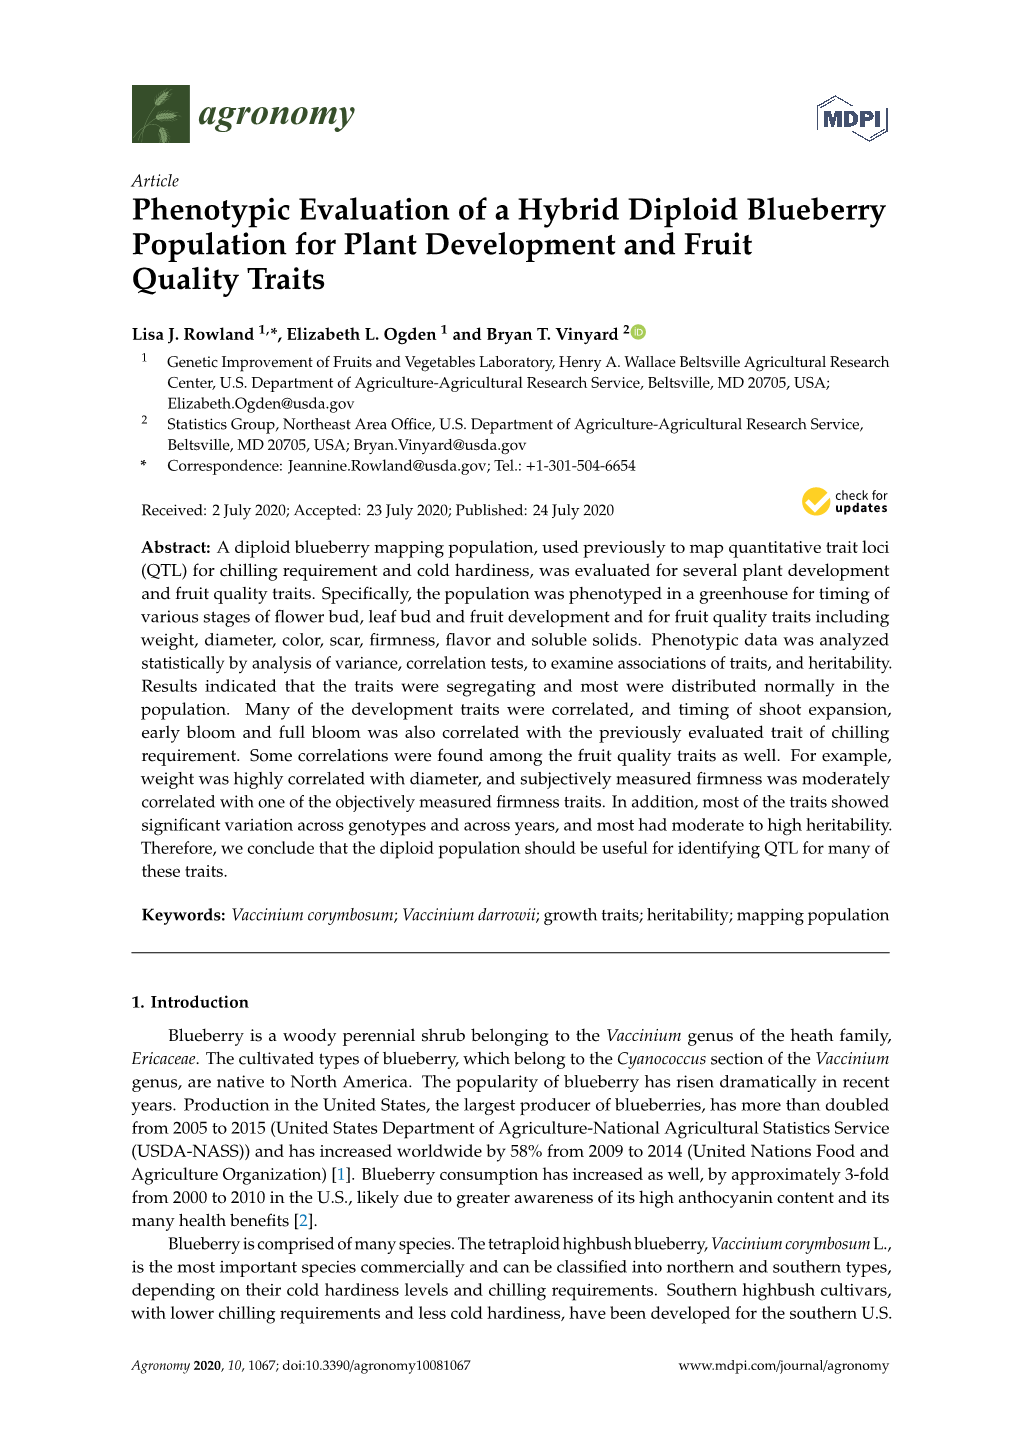 Phenotypic Evaluation of a Hybrid Diploid Blueberry Population for Plant Development and Fruit Quality Traits